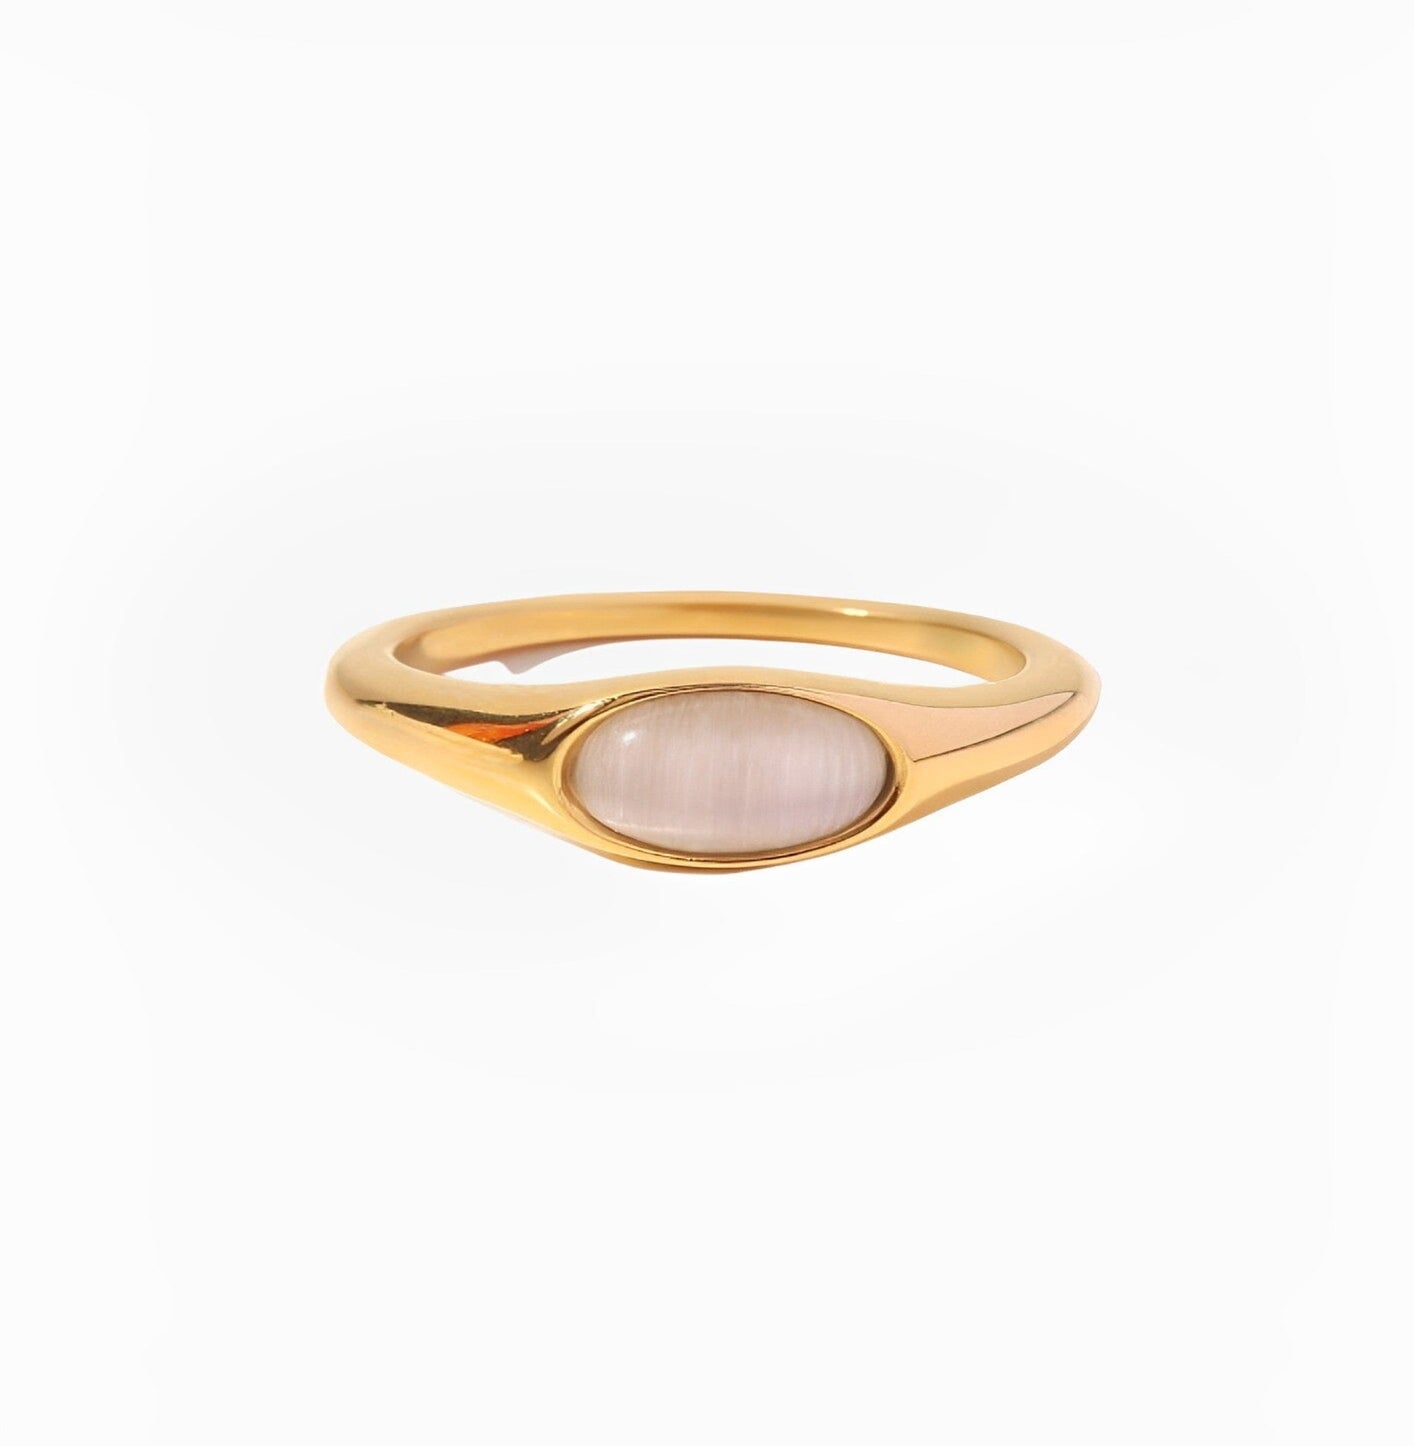 BLANCO GEMSTONE RING ring Yubama Jewelry Online Store - The Elegant Designs of Gold and Silver ! 